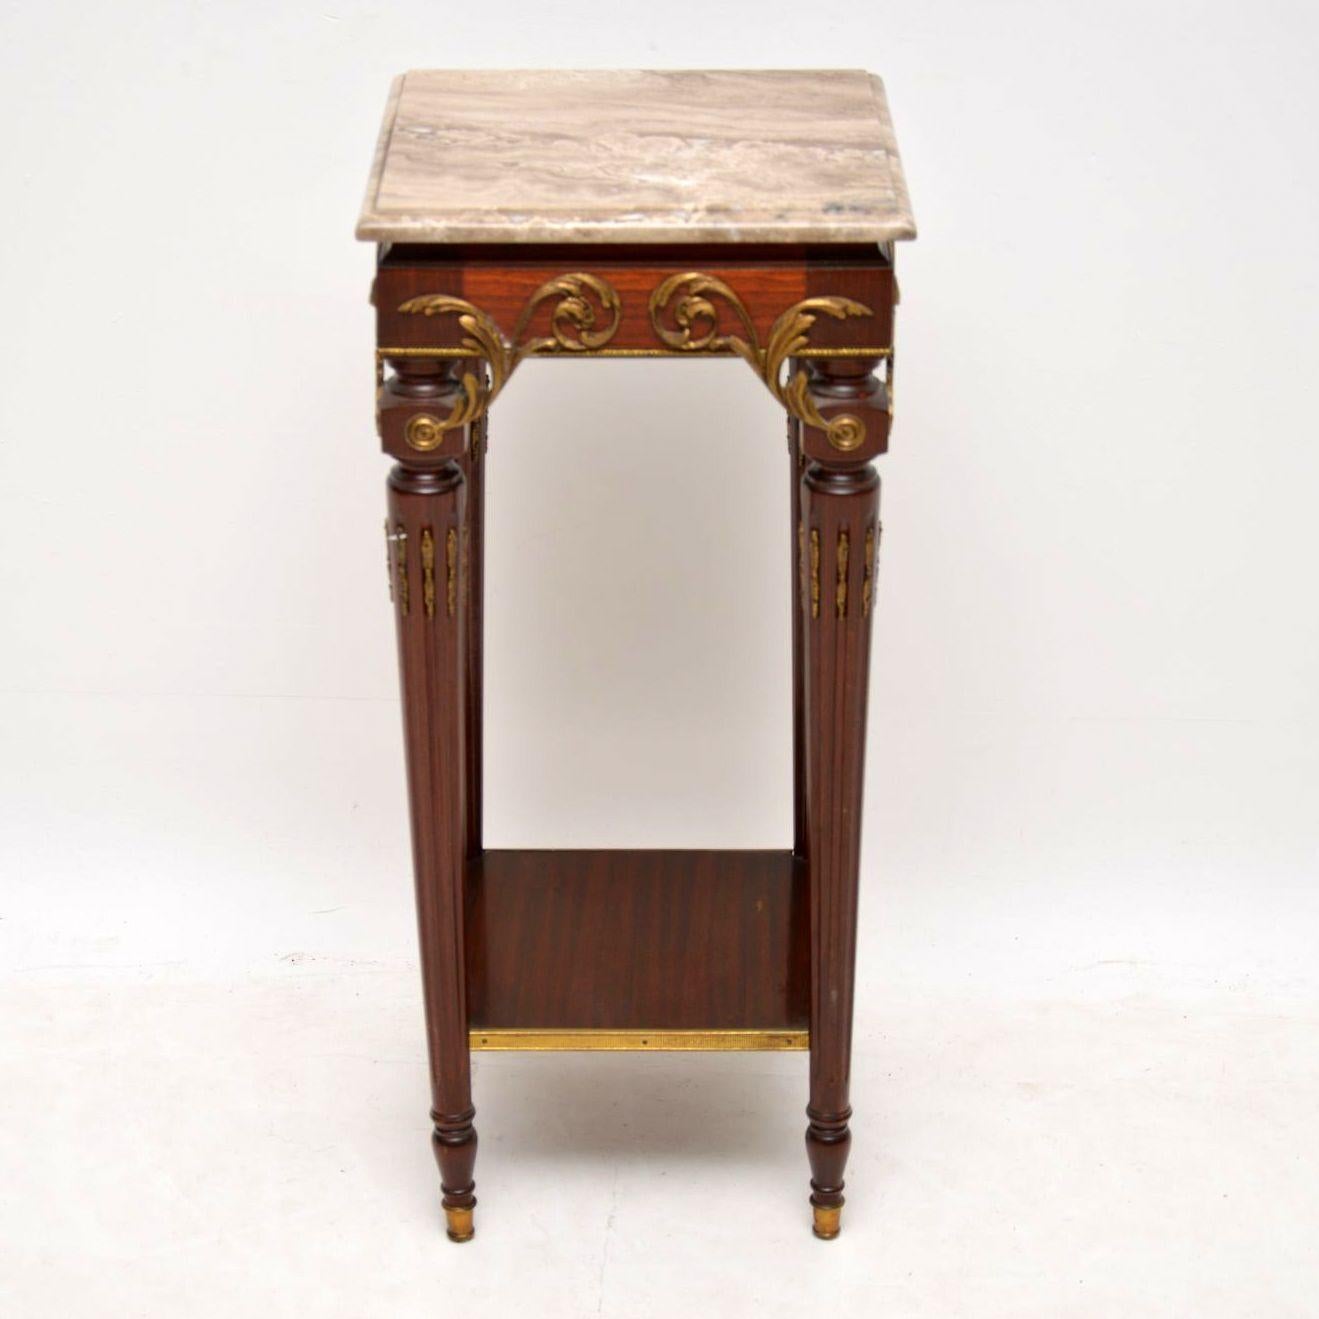 This antique French marble top mahogany side table could be used as a stand to display something on. It has the original marble top, turned fluted legs, a bottom platform and sits on gilt metal feet. This table has gilt bronze mounts all around the